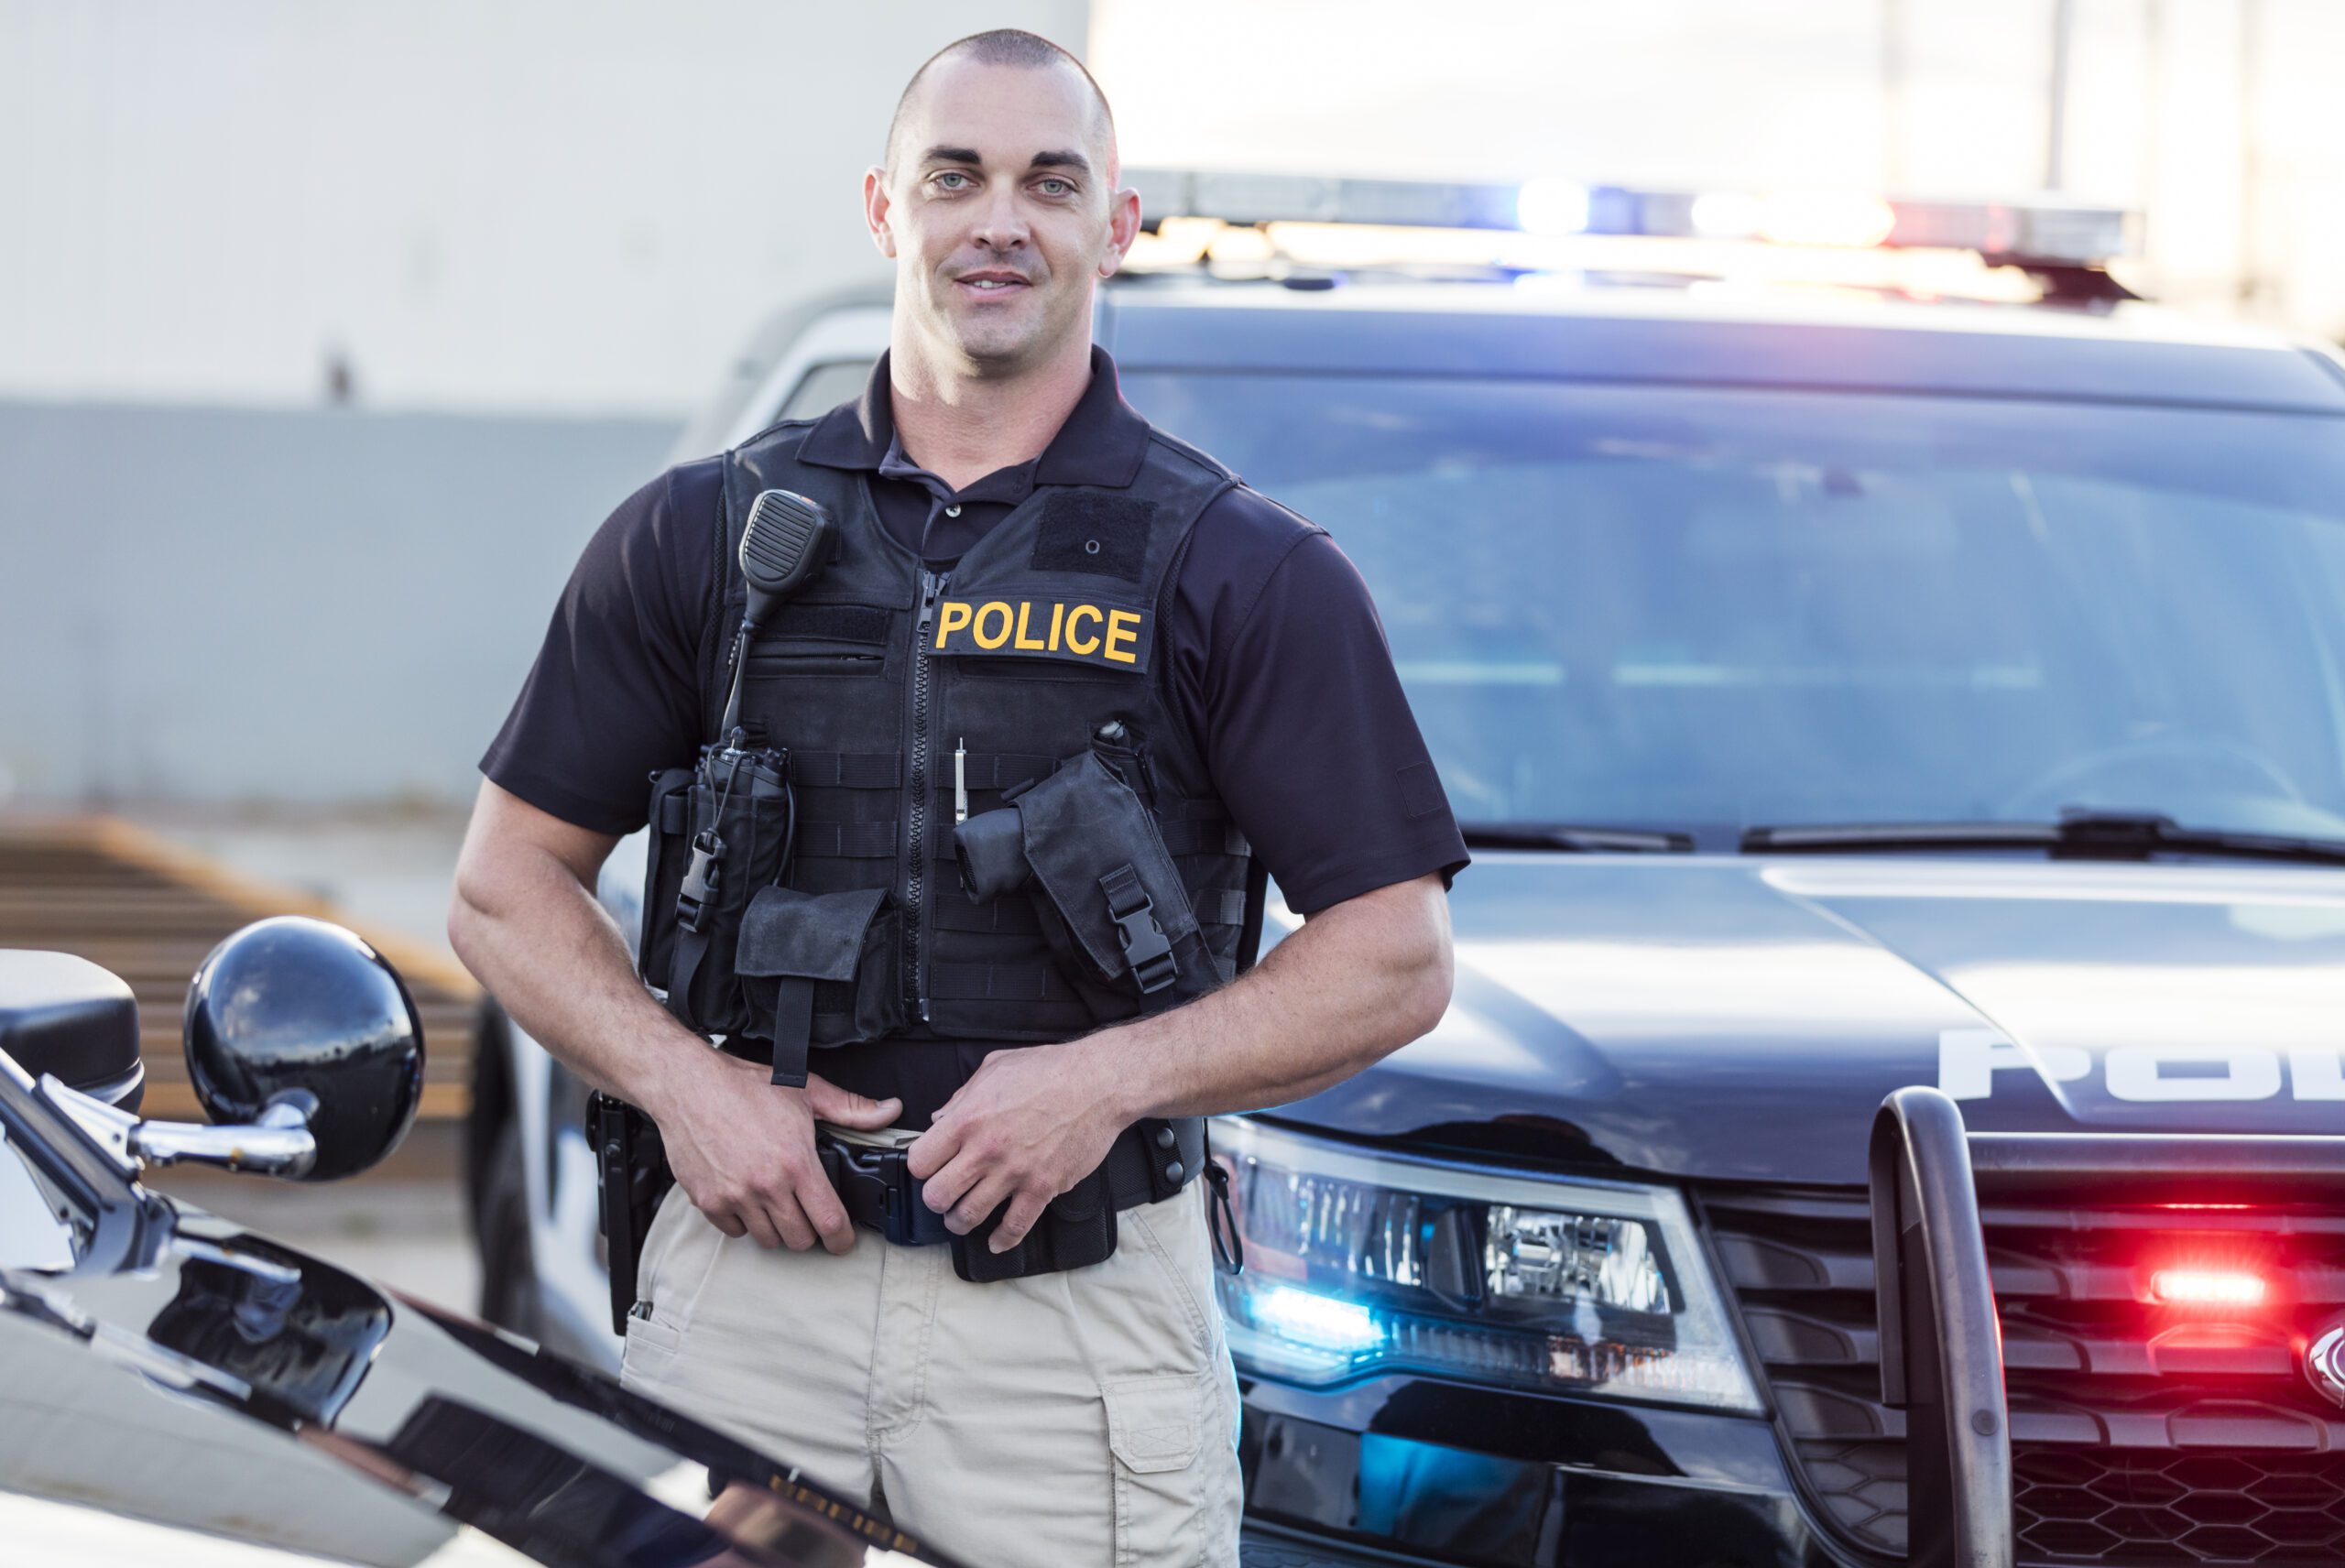 Acuity International Supports Law Enforcement through Donation of Life-Saving Equipment